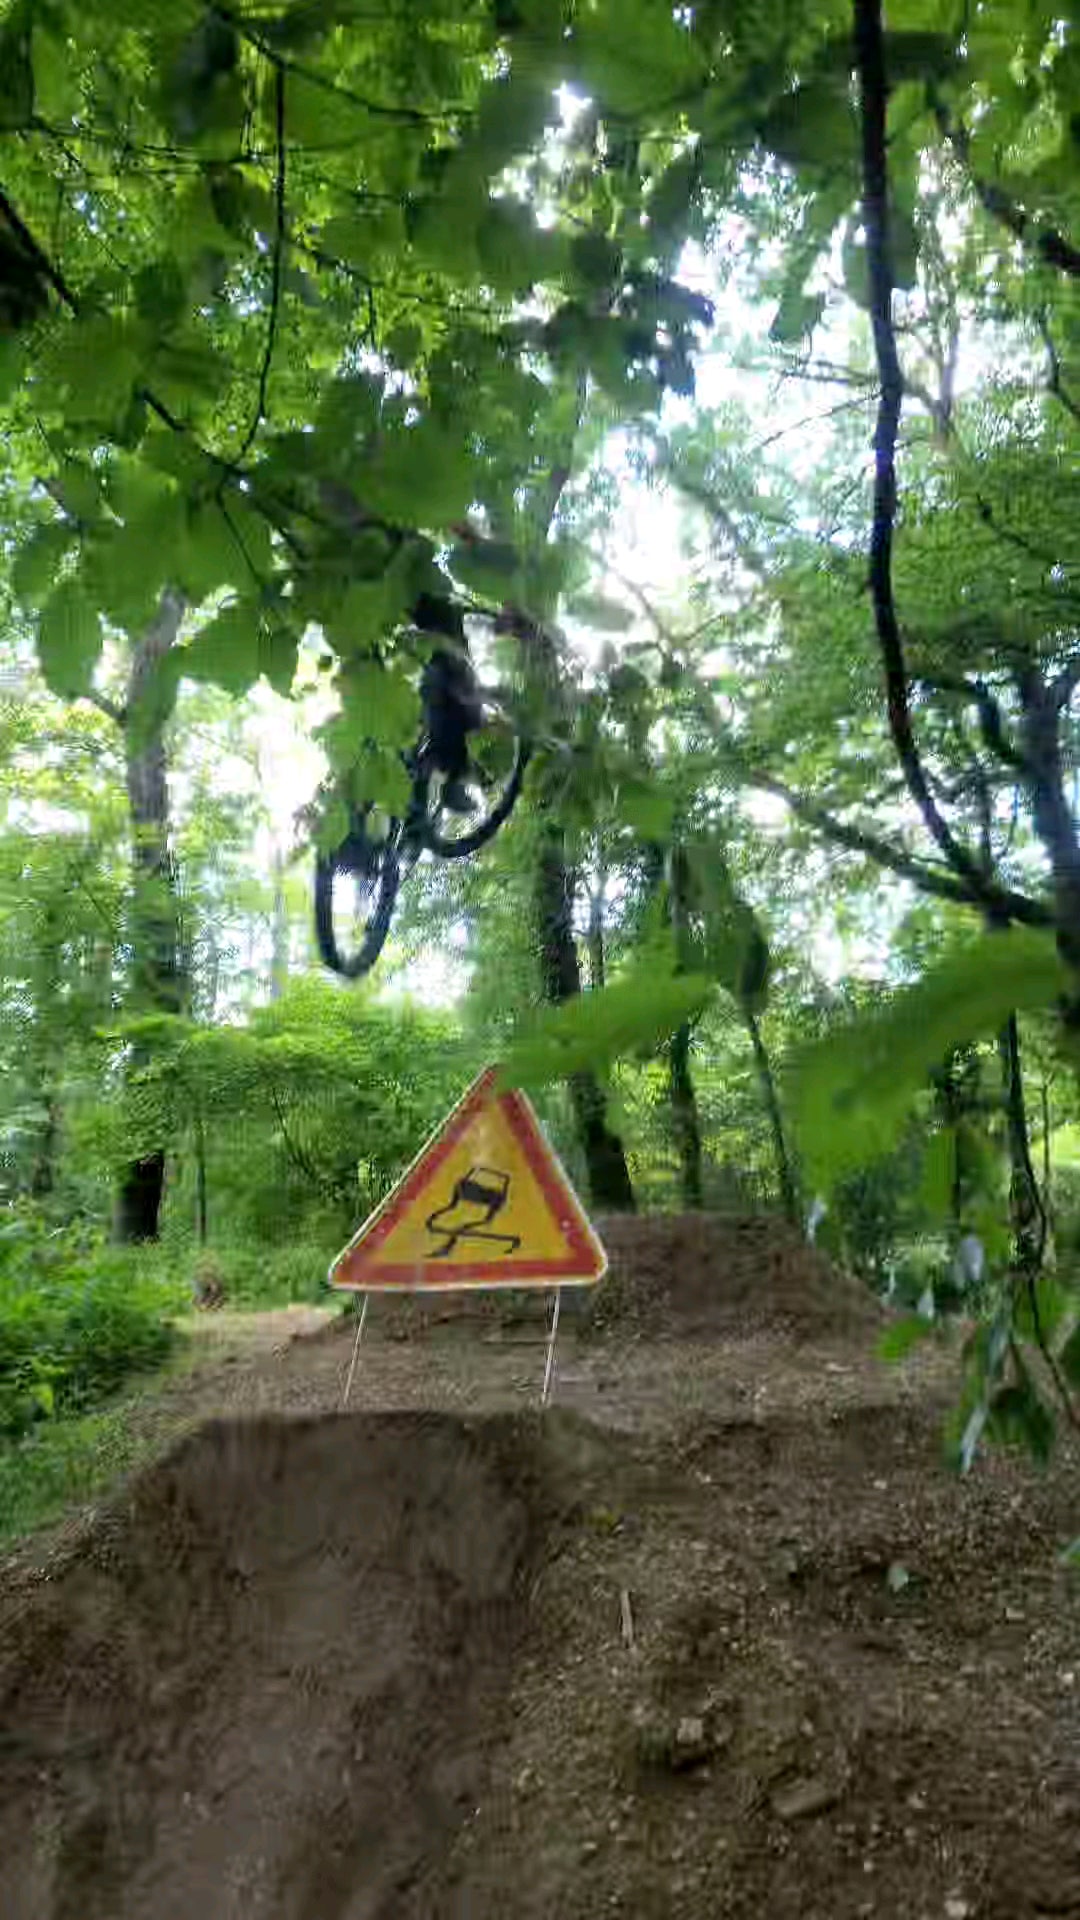 lil edit(first time posting here) : mountainbiking